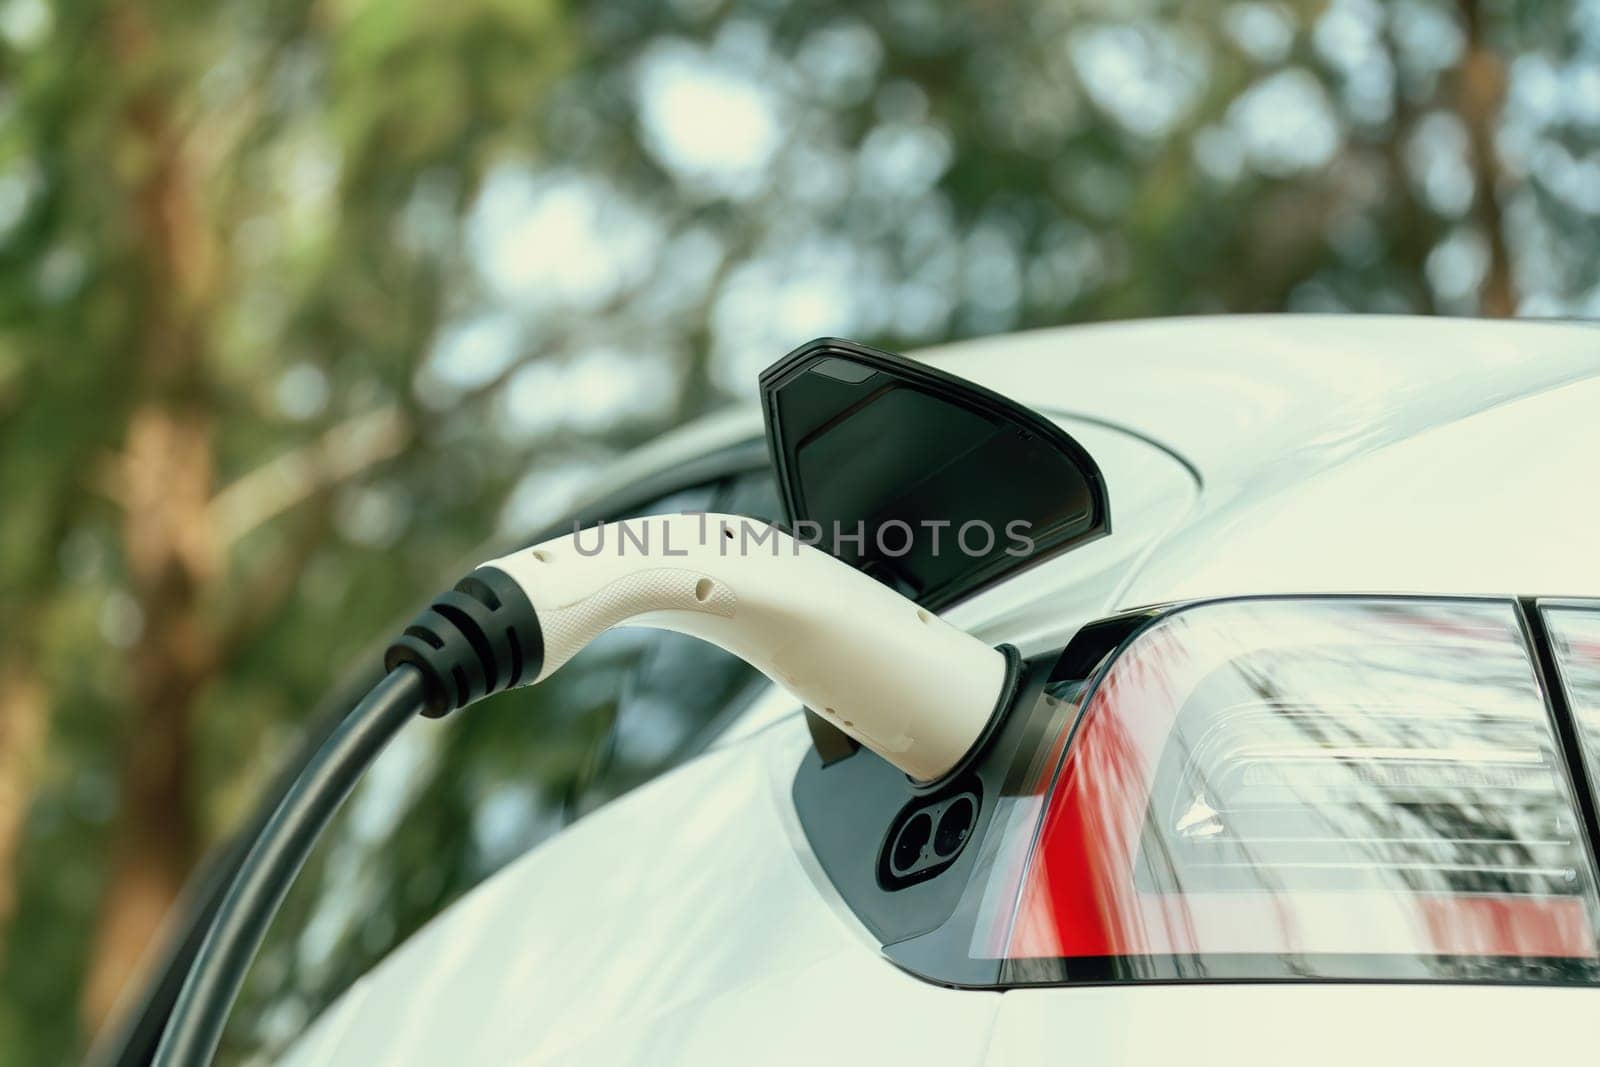 Closeup EV charger handle plugged in or connect to electric car, recharging EV car battery with alternative and sustainable energy with zero CO2 emission for clean environment. Perpetual